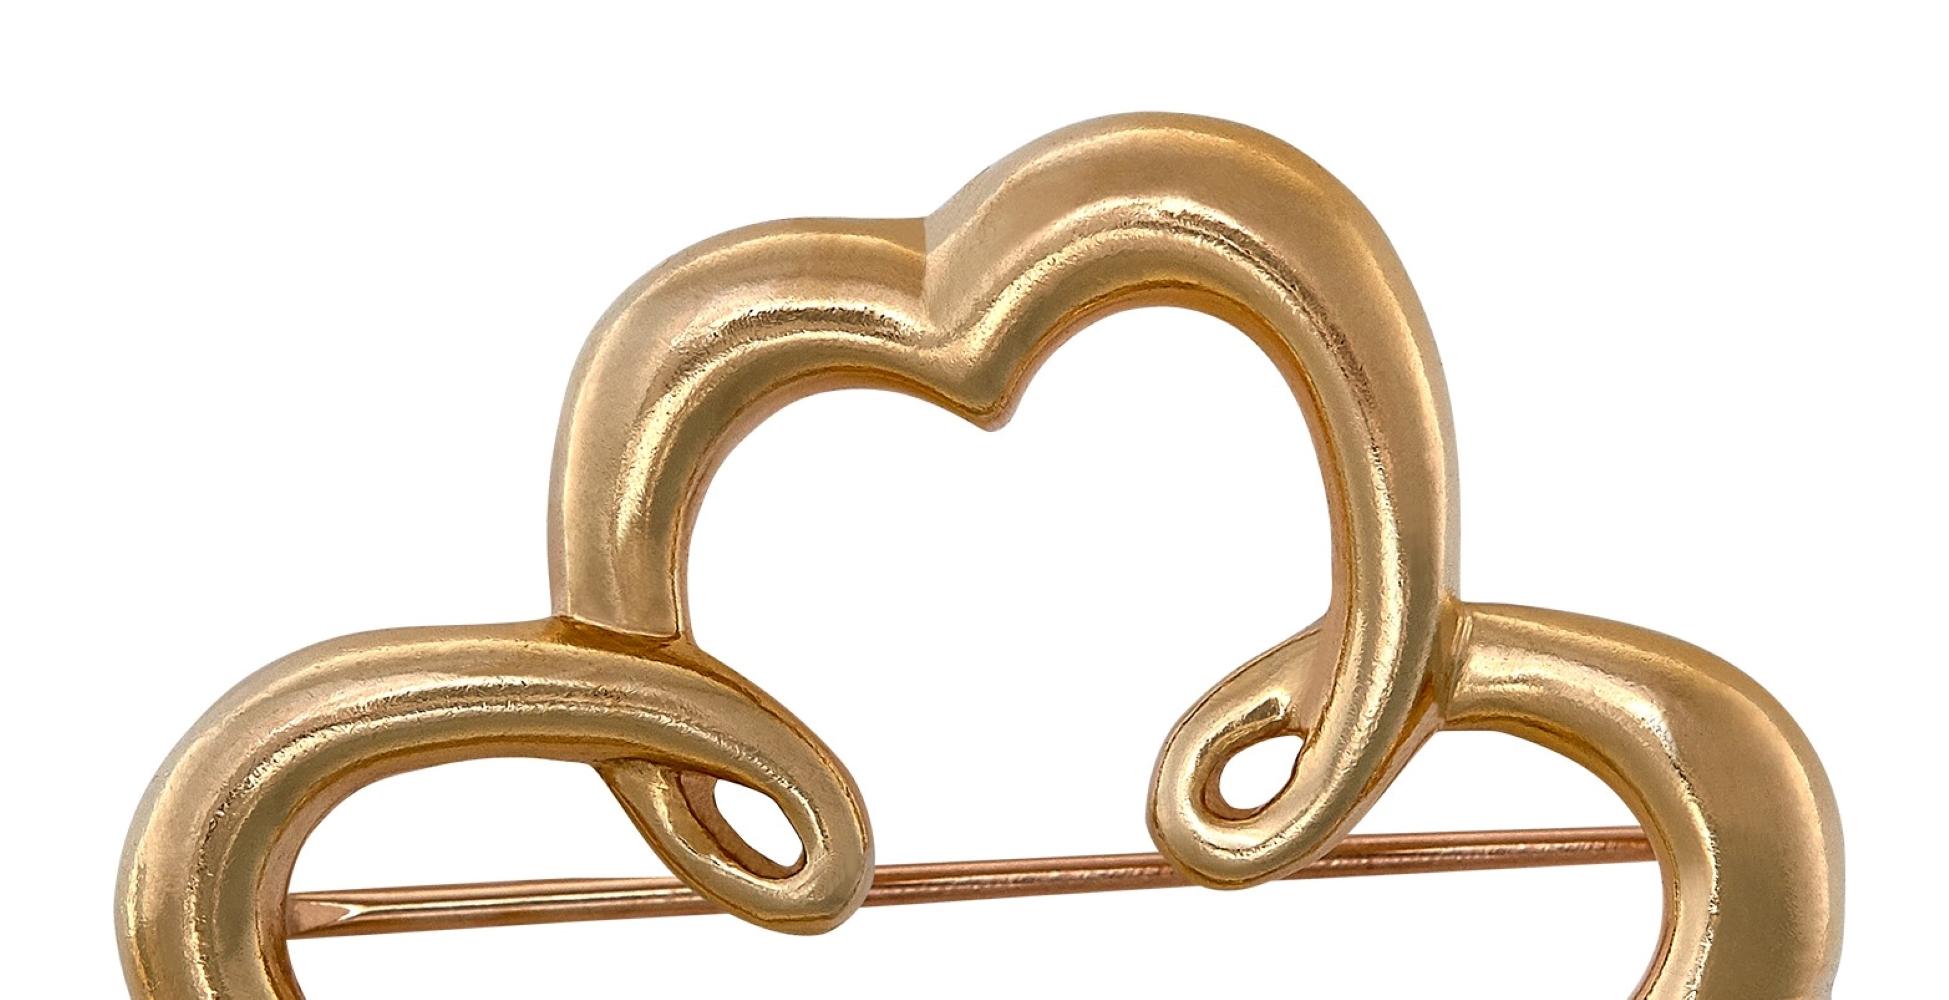 Vintage Tiffany & Co Brooch by Paloma Picasso, 18 karat yellow gold. Classic and timeless, this vintage brooch designed by Paloma Picasso for Tiffany & Co. needs your love and admiration. With whimsical lines flowing together in a clover pattern,